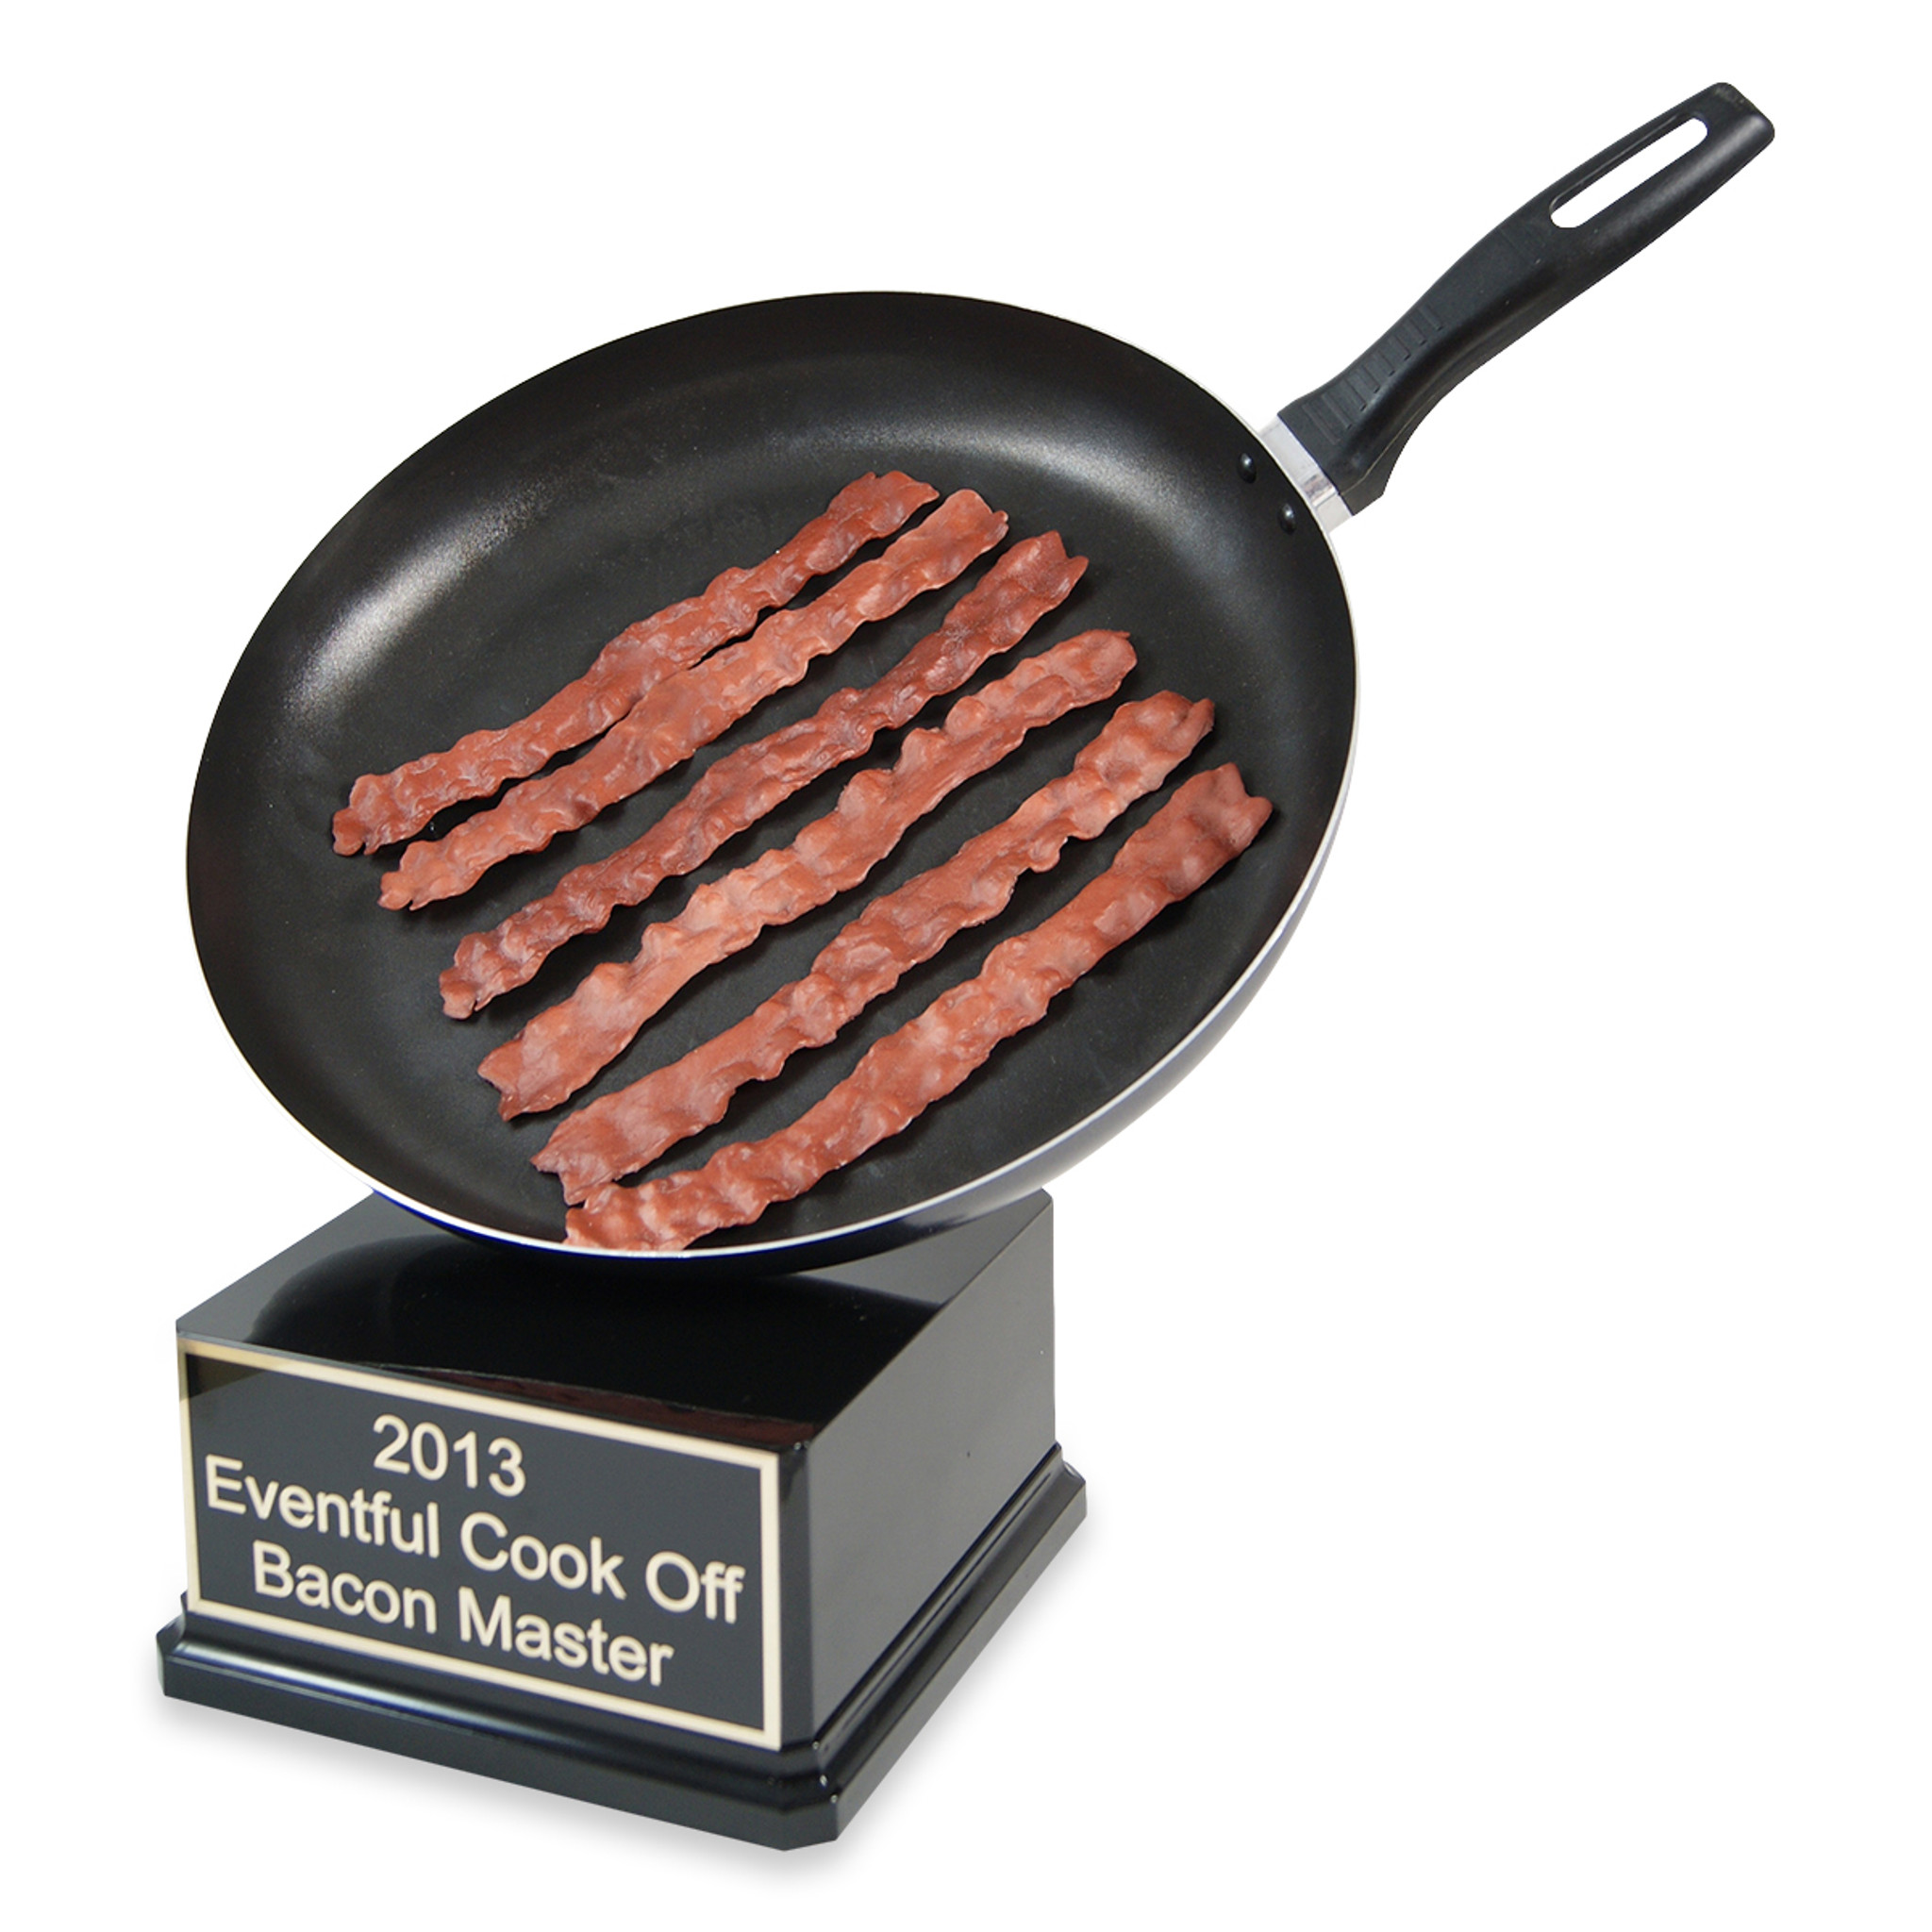 https://cdn11.bigcommerce.com/s-241f7/images/stencil/2048x2048/products/917/2218/bacon_trophy__66184.1374262876.jpg?c=2